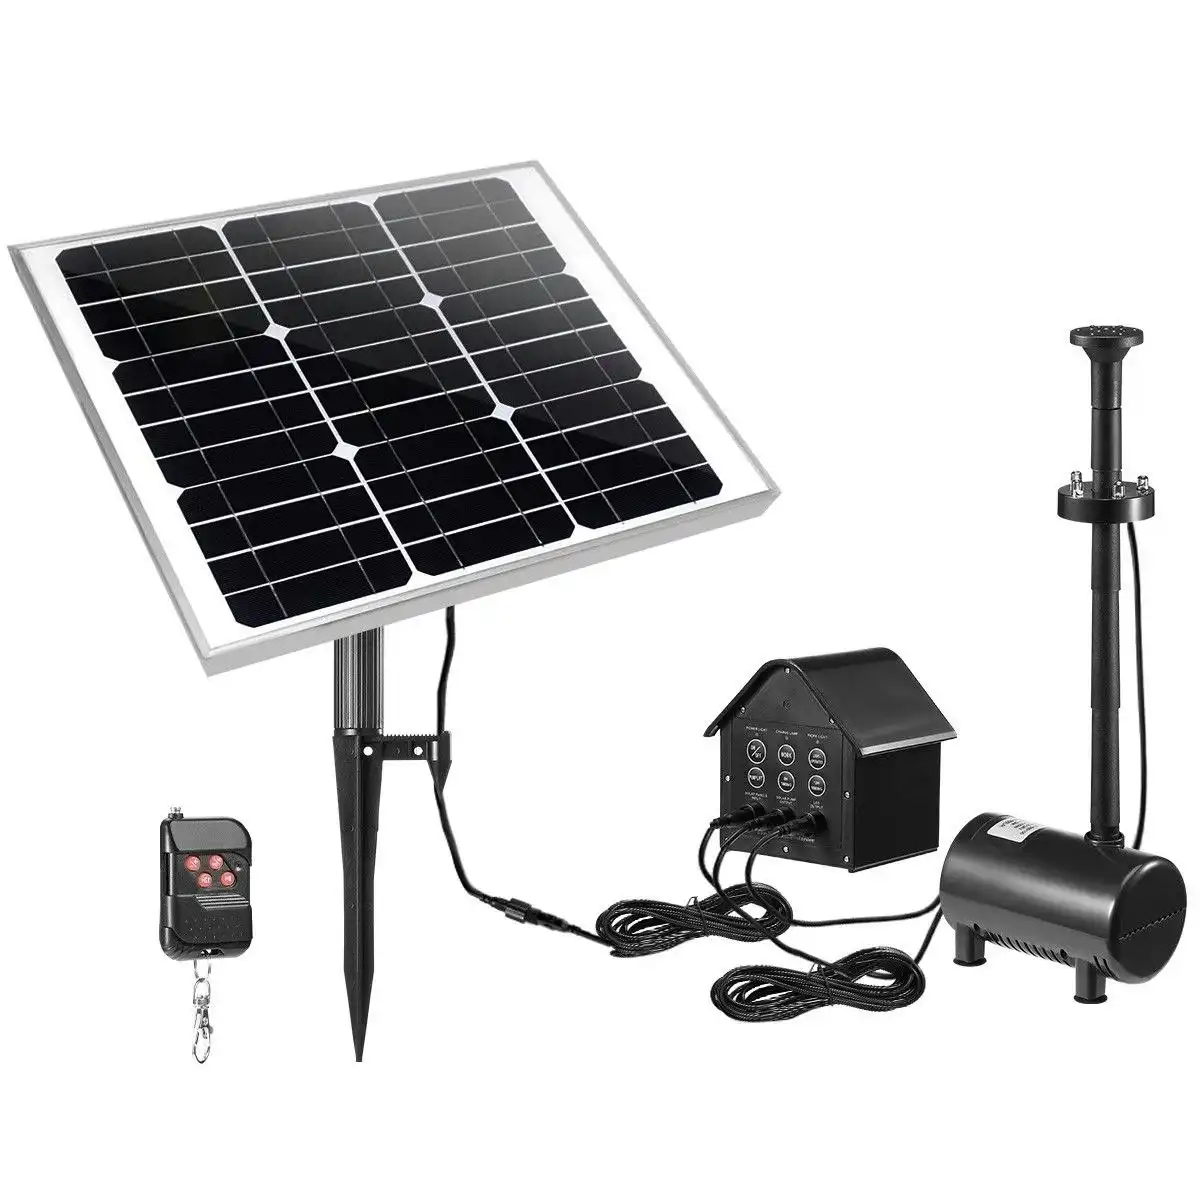 Ausway 100W Solar Fountain Water Pump with Battery and LED Light for Birdbath Garden Pool